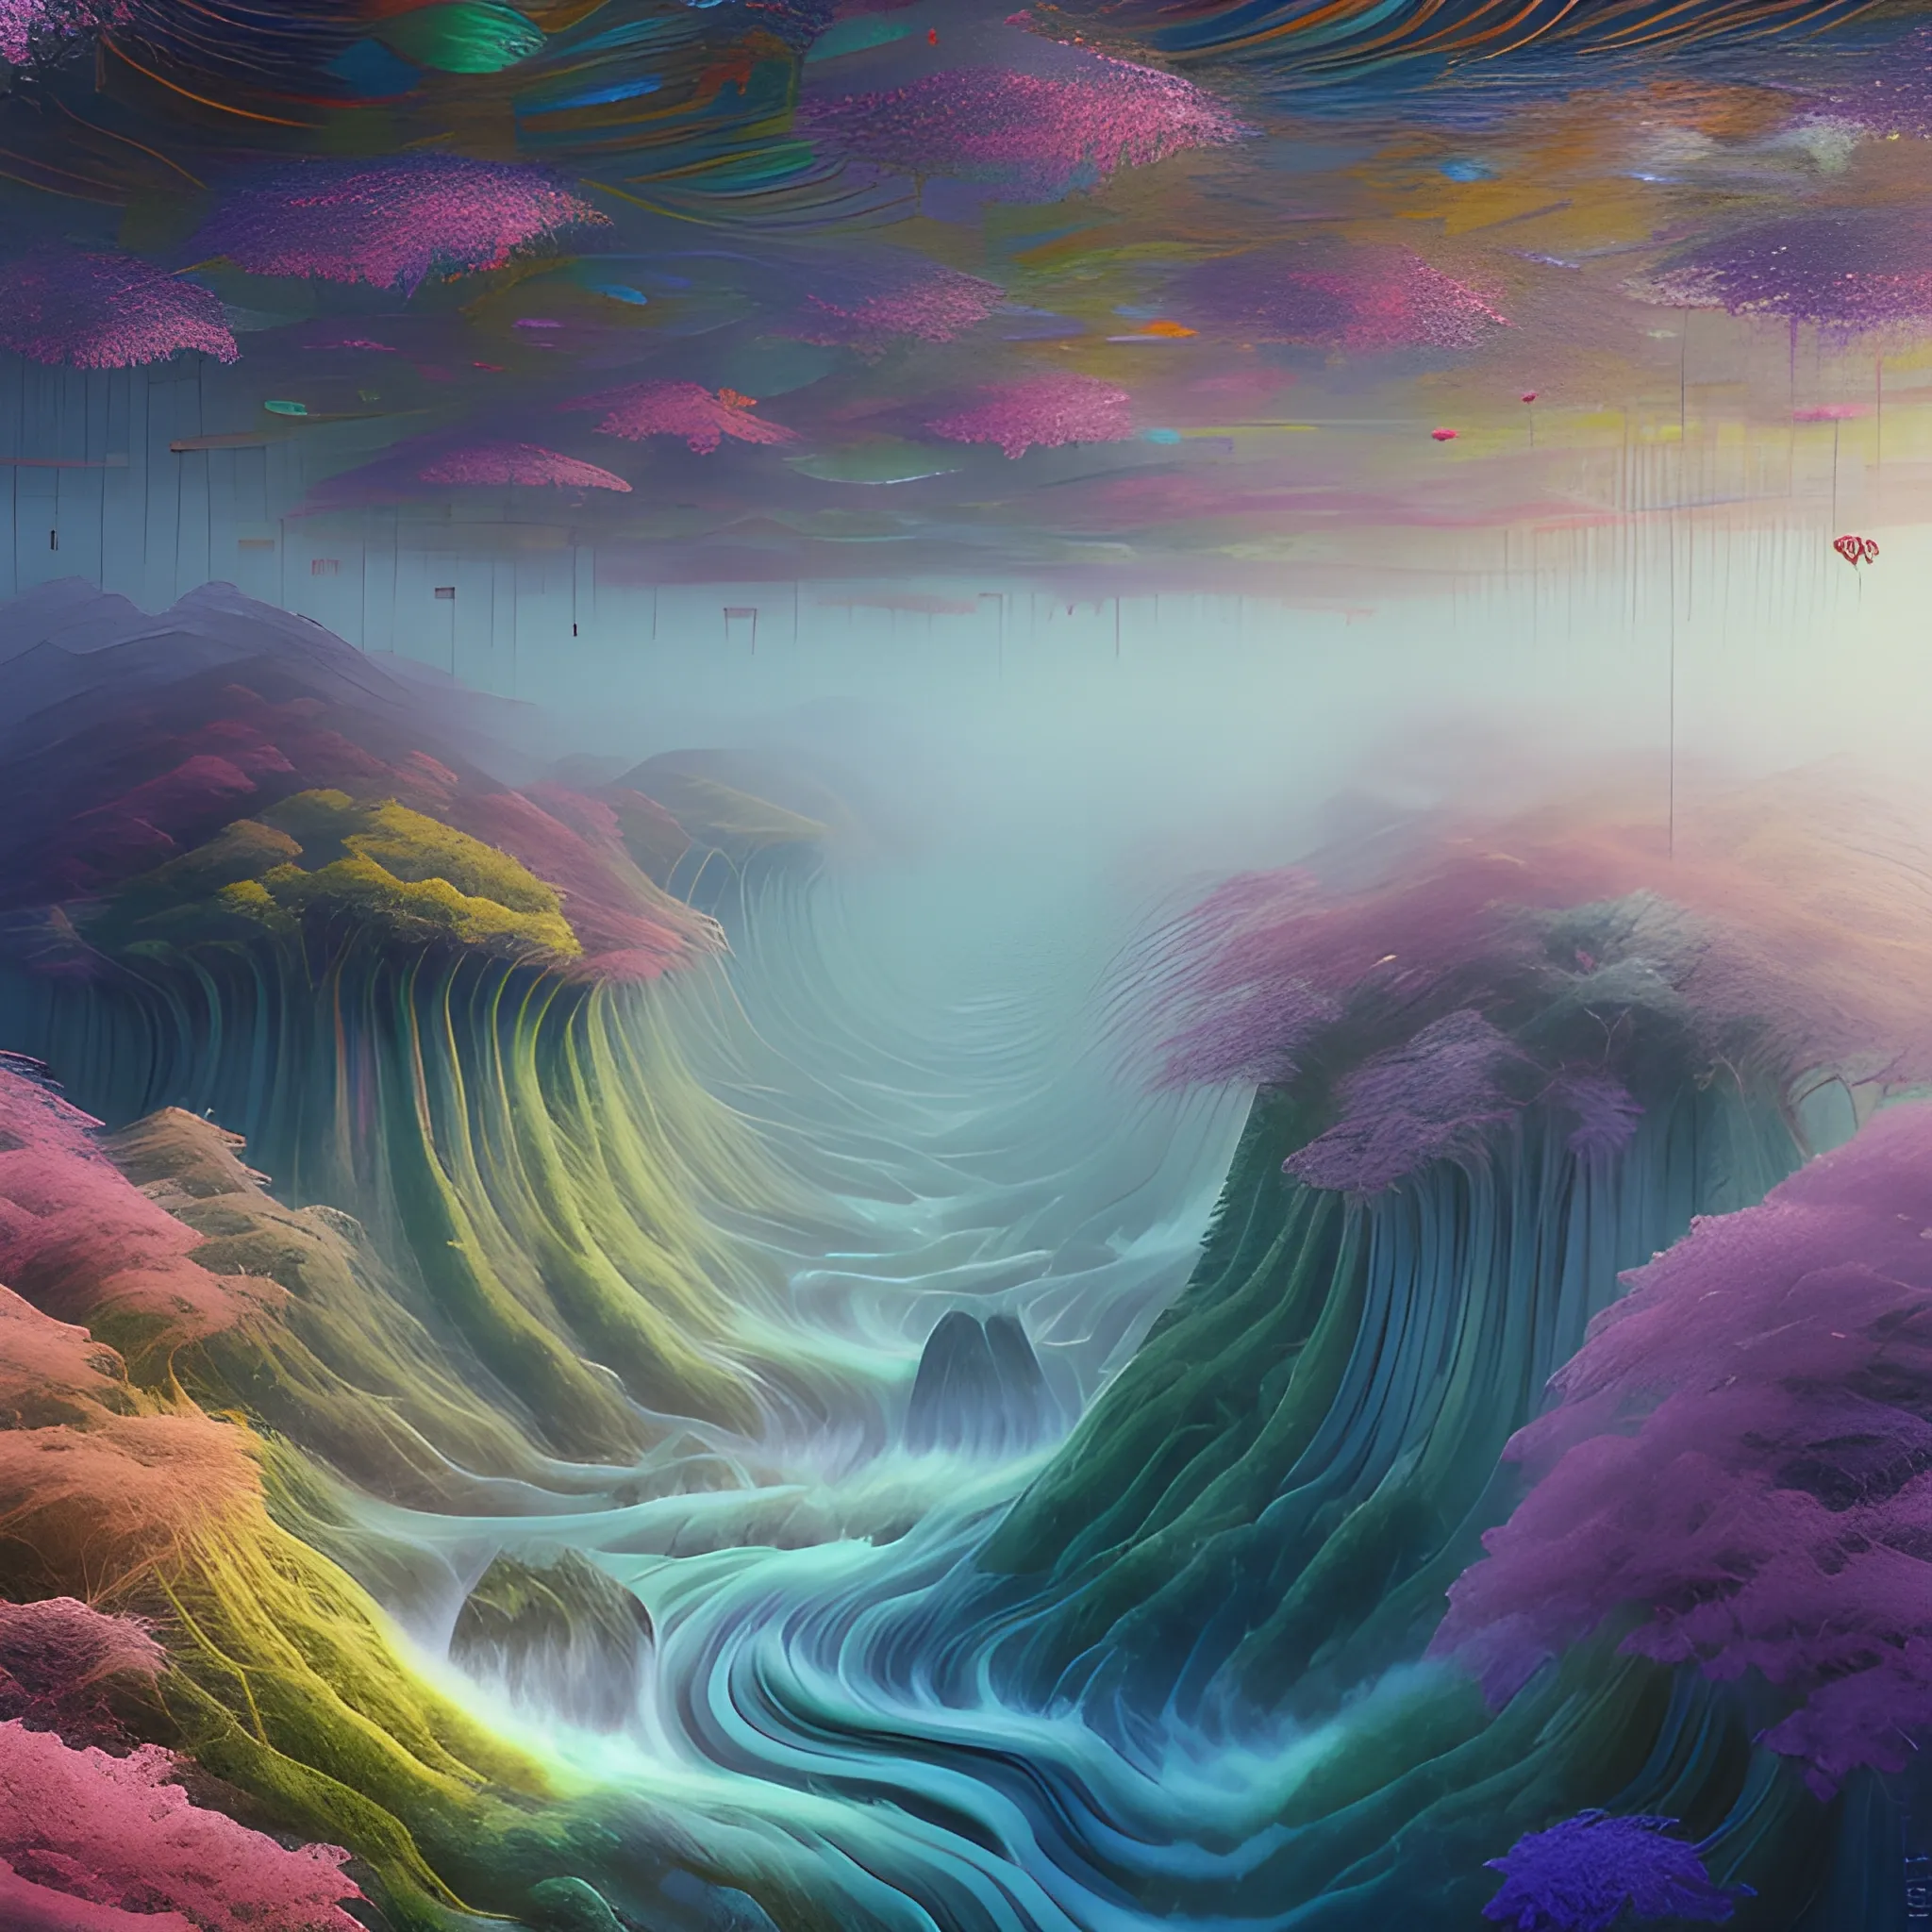 (by Ananta Mandal (and Andrew Biraj:0.5)), (in the style of nihonga), Style: Abstract, Medium: Digital illustration, Subject: An otherworldly landscape with floating islands, cascading waterfalls, and vibrant flora and fauna. Camera Angle: Overhead shot capturing the vastness and intricate details of the scene. The colors are saturated, and the lighting creates a warm and ethereal atmosphere. The painting is highly detailed, with every brushstroke capturing the complexity of the imaginary world., (high quality), (detailed), (masterpiece), (best quality), (highres), (extremely detailed), (8k), Oil Painting